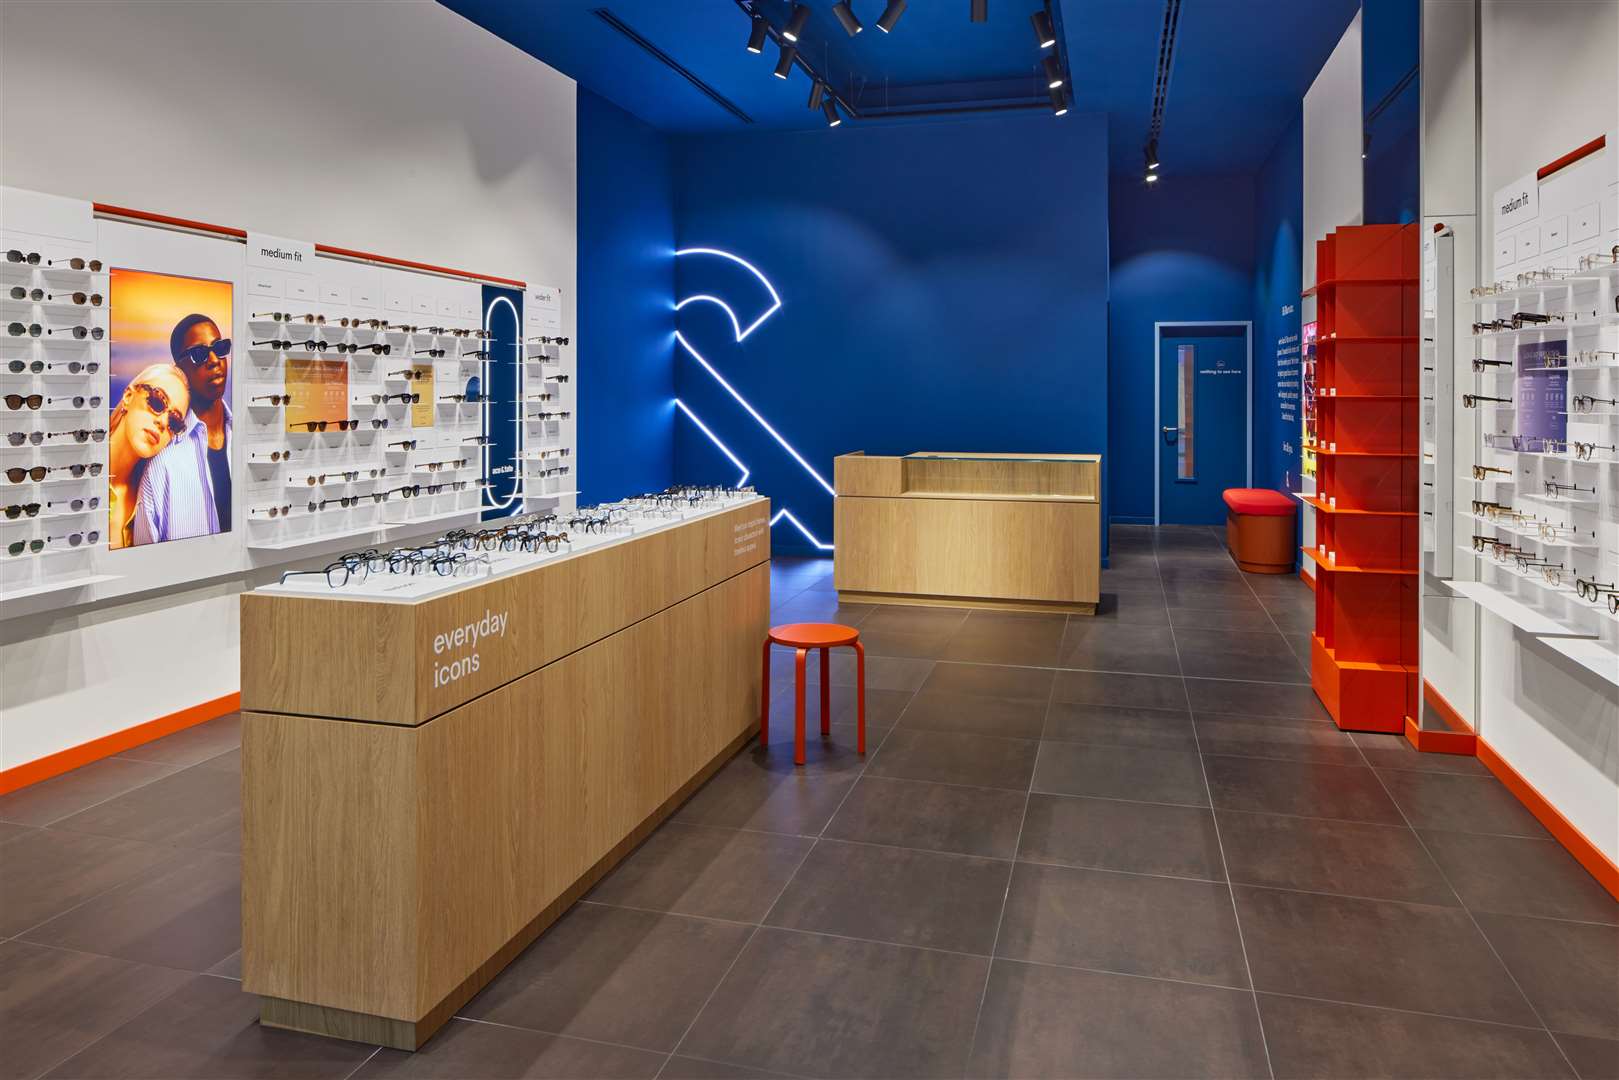 The Amsterdam brand sells glasses, sunglasses and accessories. Picture: Umpf